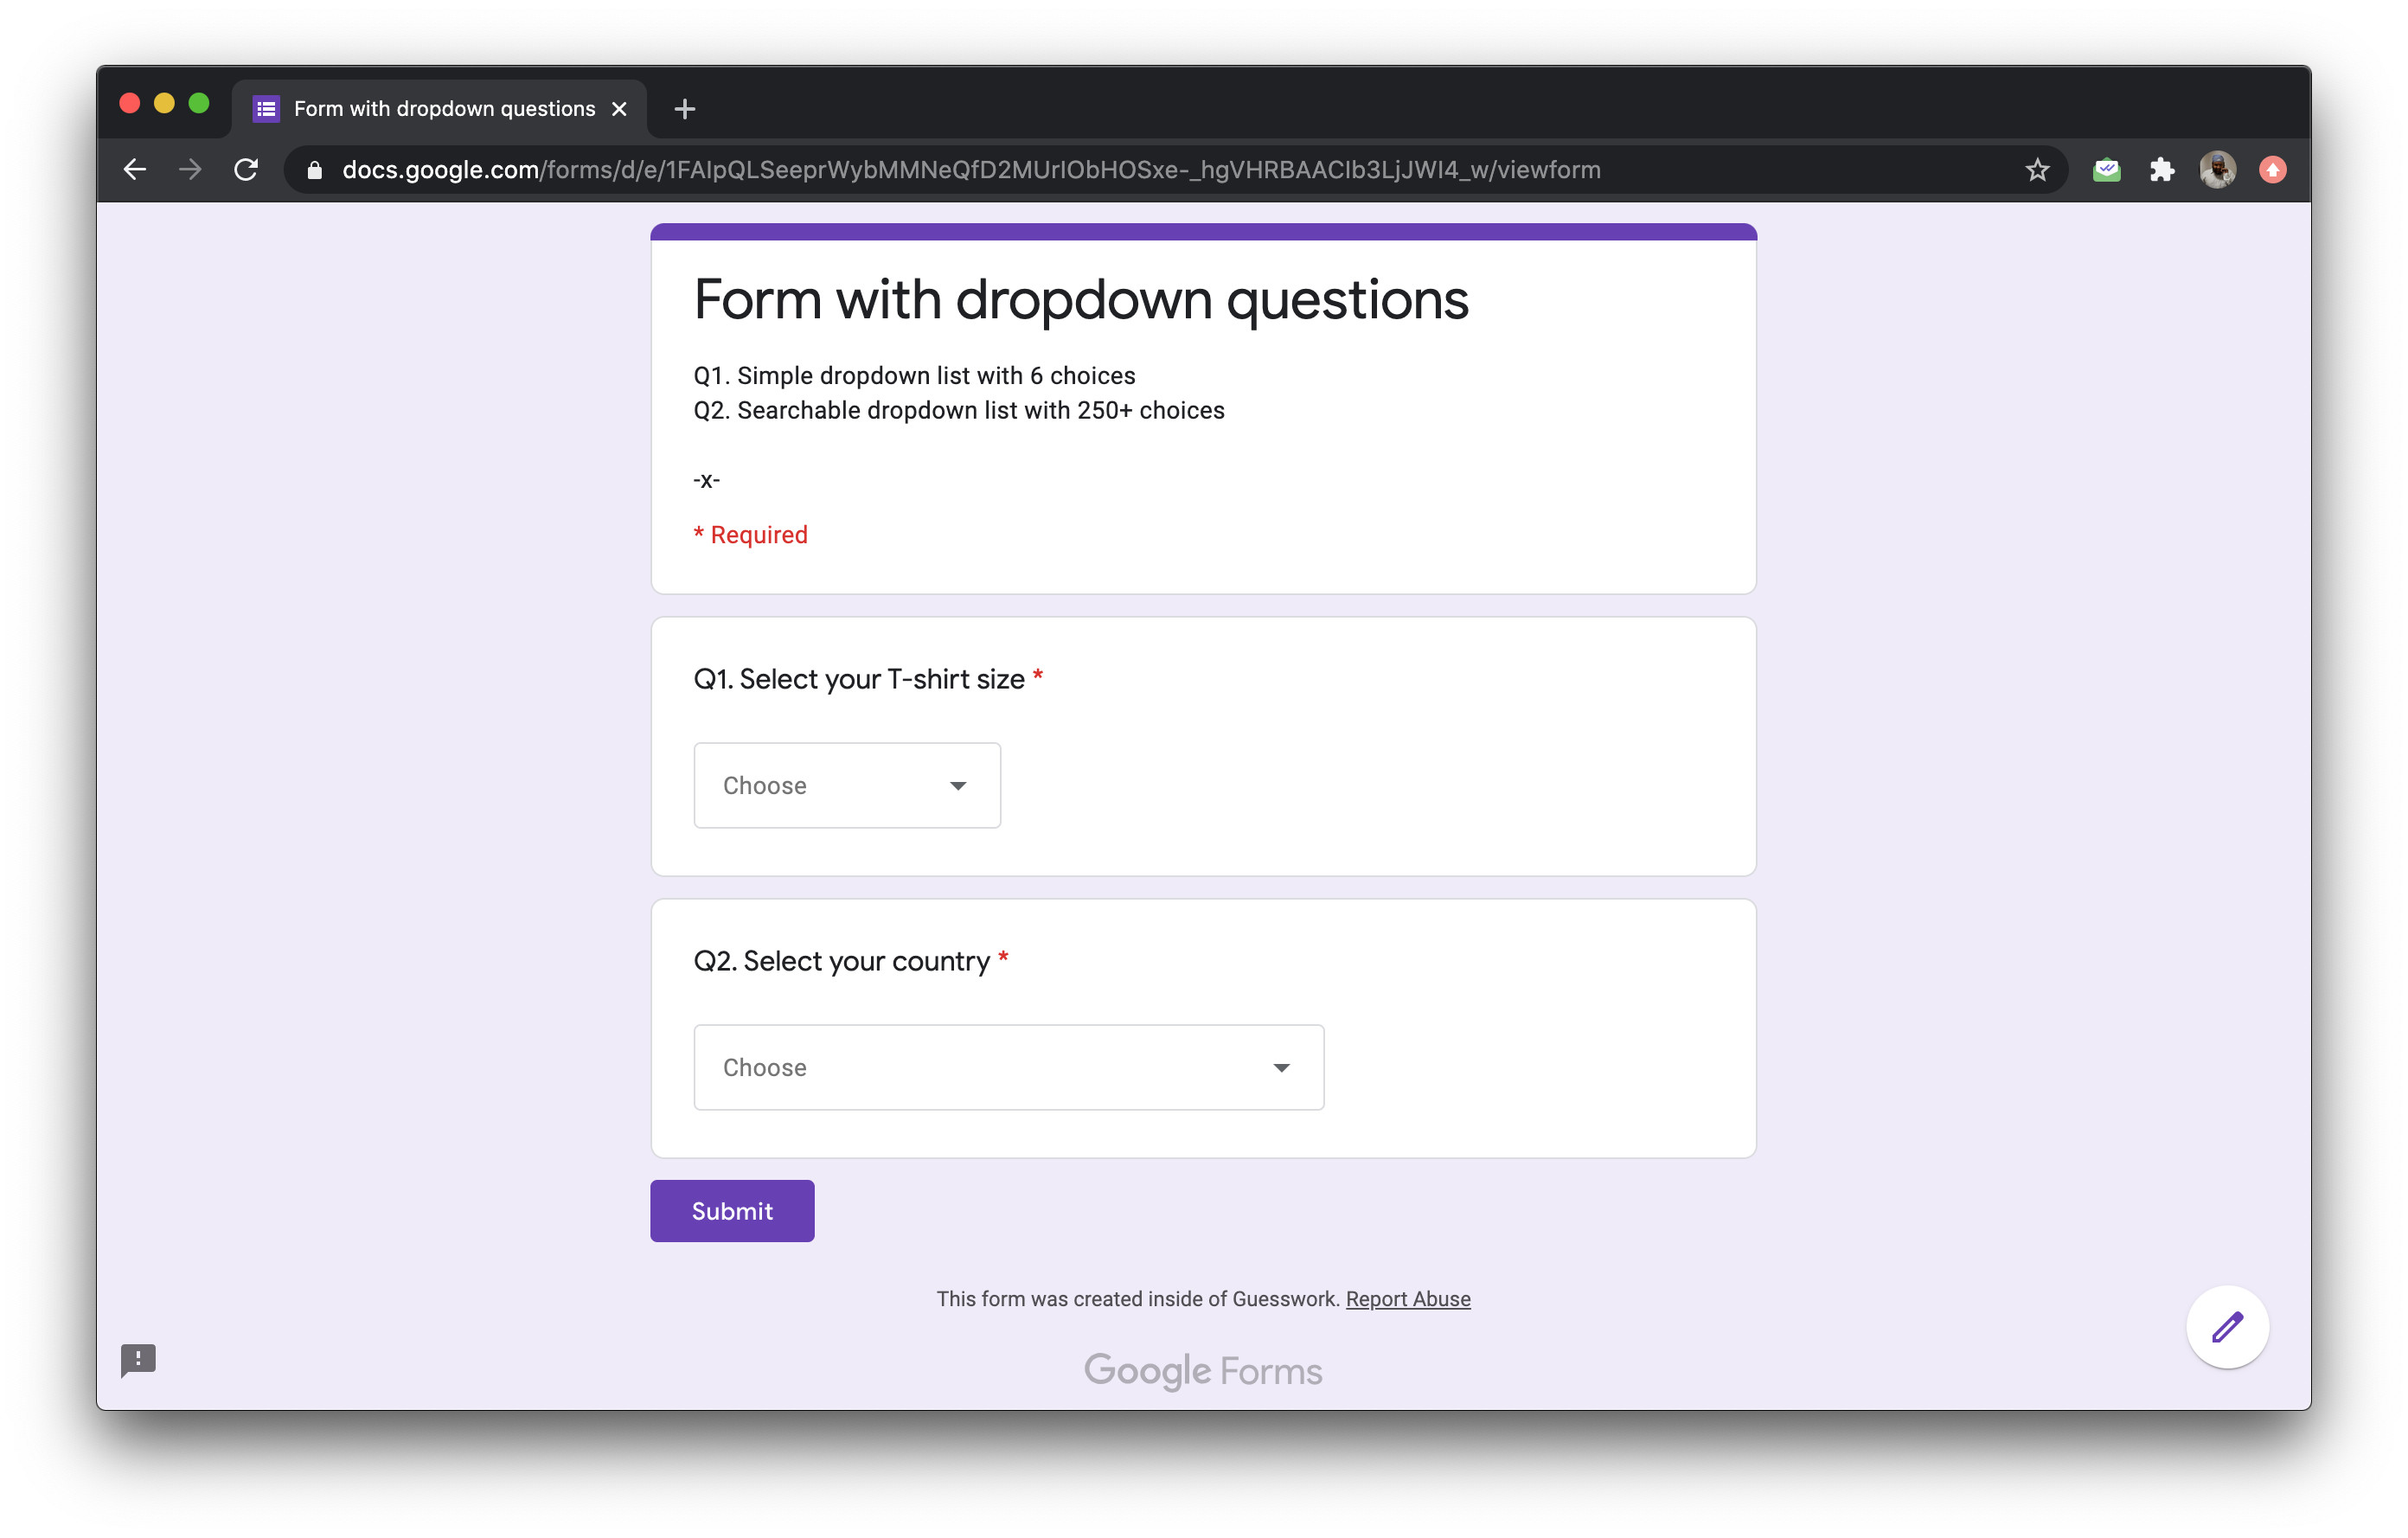 Dropdown question allows users to select an answer from a [long] list of options. This is similar to a multiple choice question that allows users to select only one answer from the available choices.